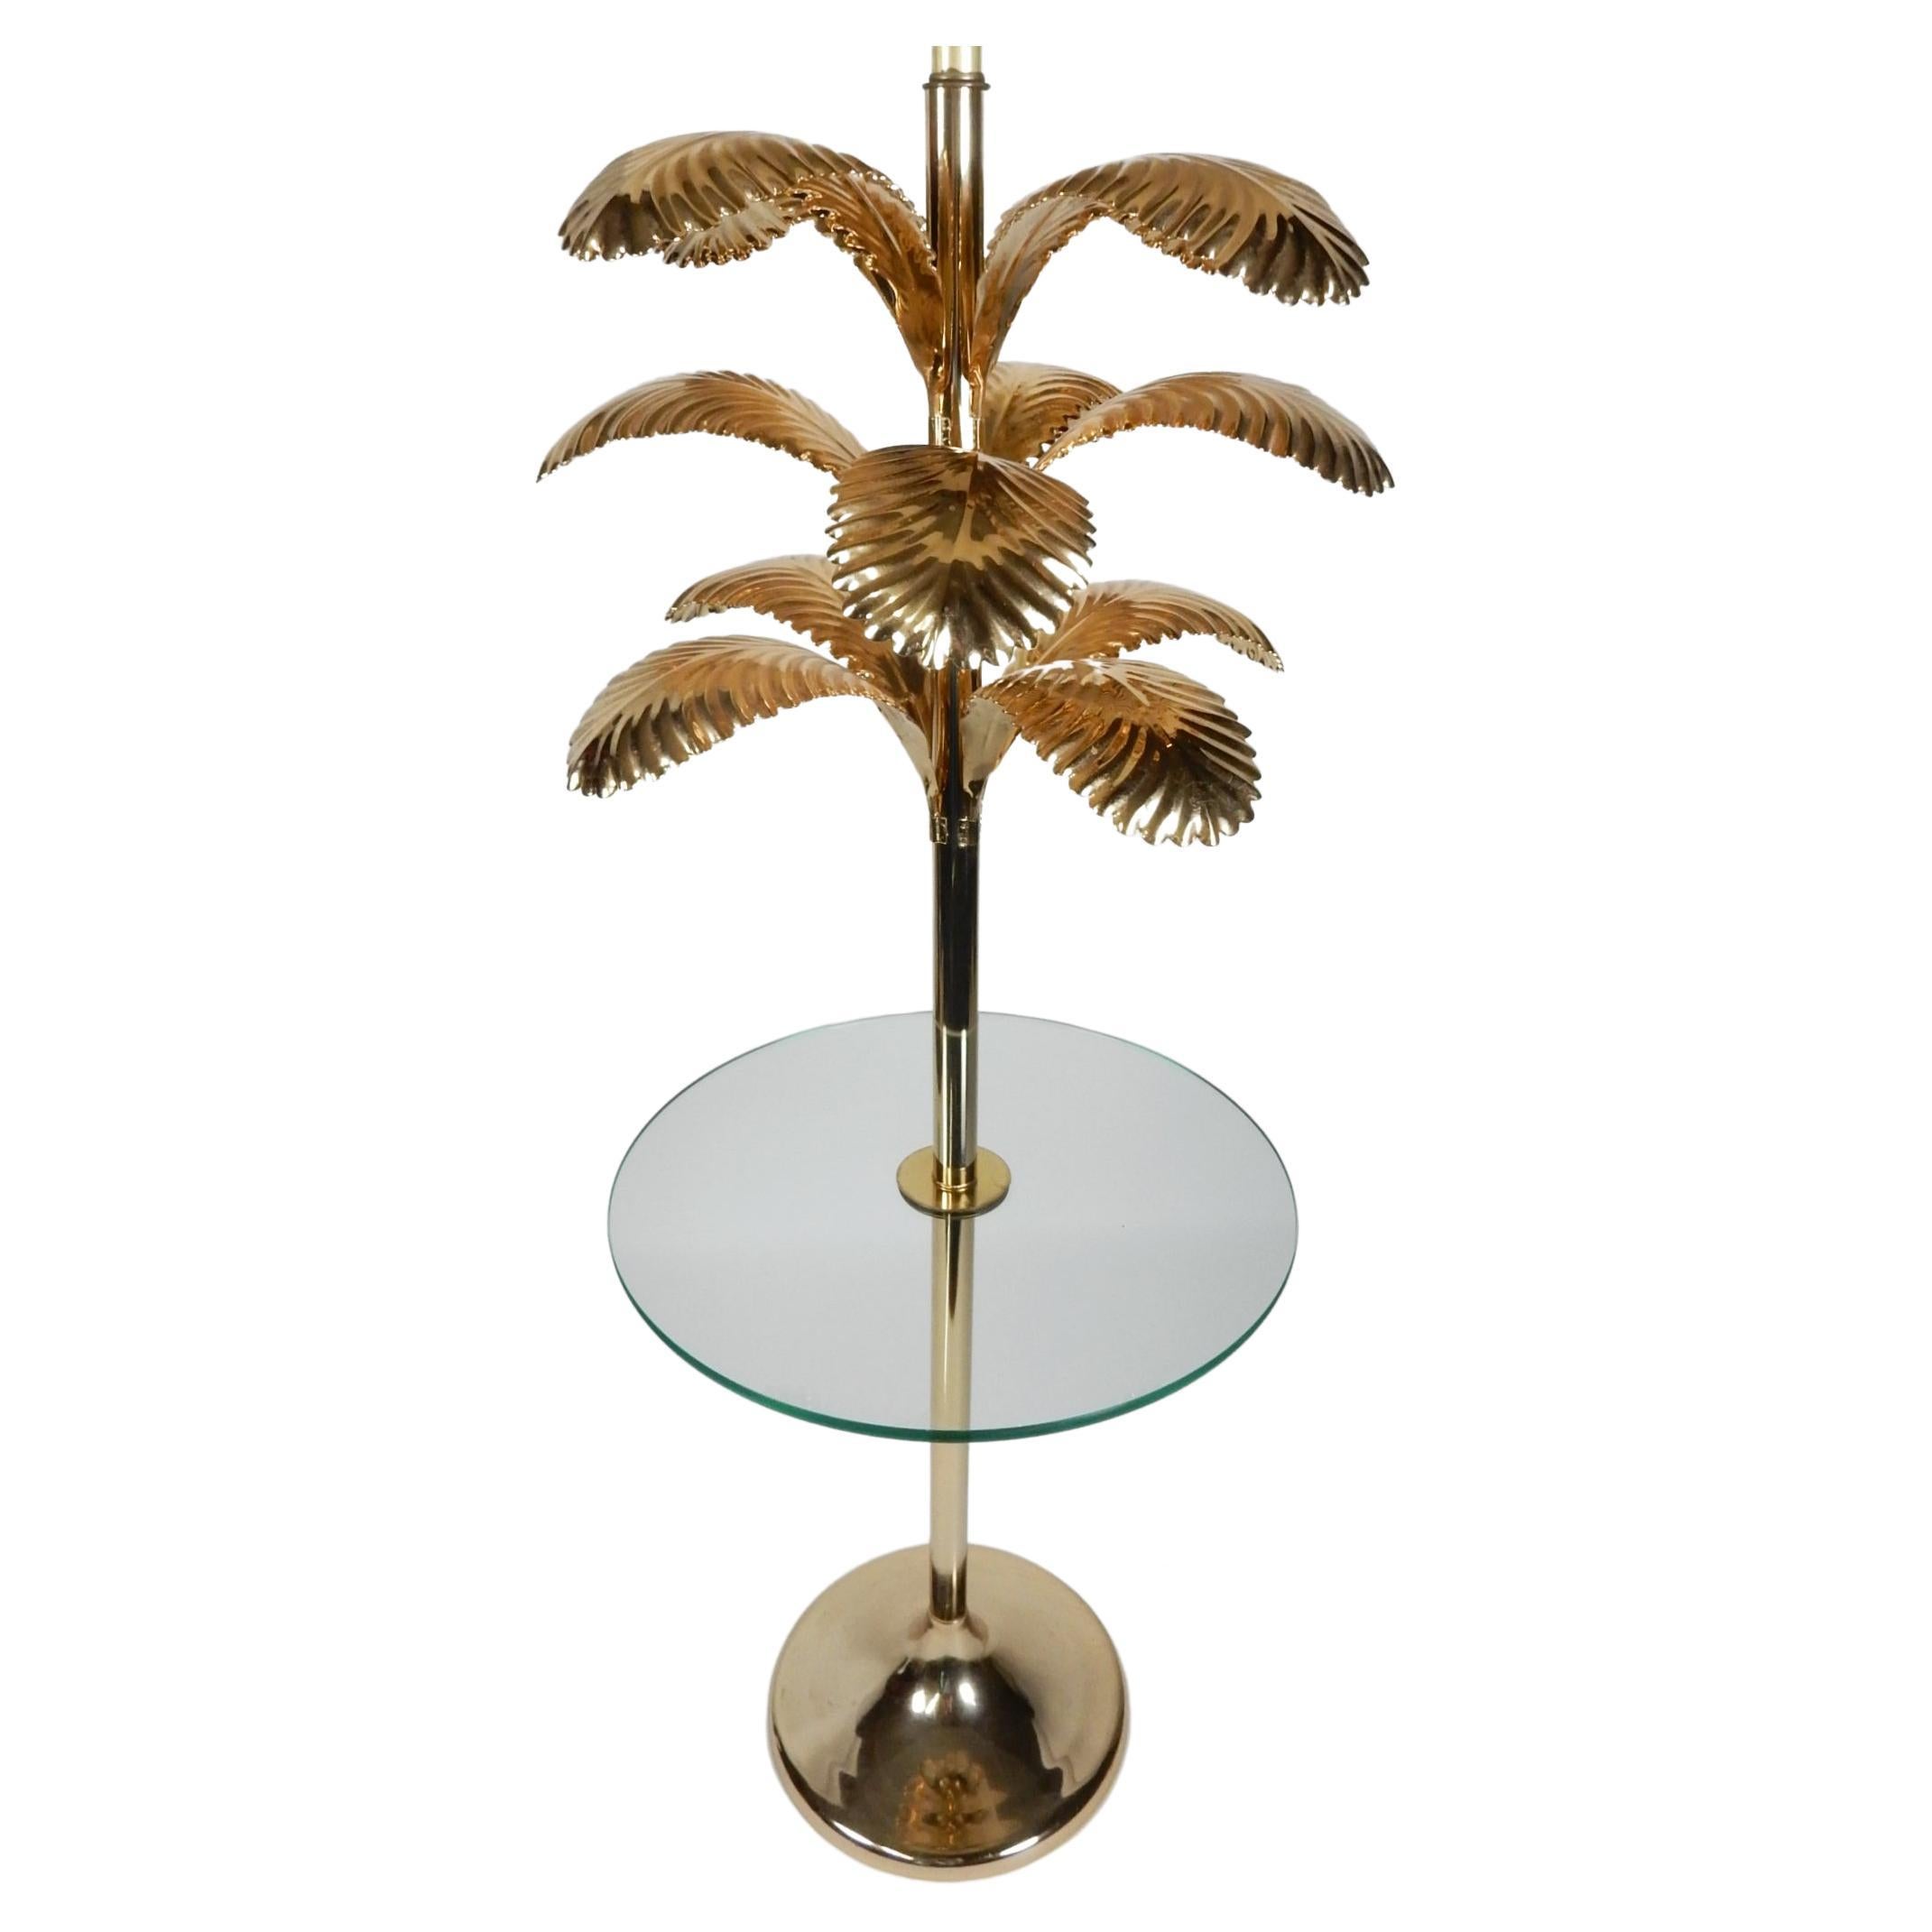 Italian Stylized Brass Palm Leaf Floor Lamp & Table In Good Condition For Sale In Las Vegas, NV